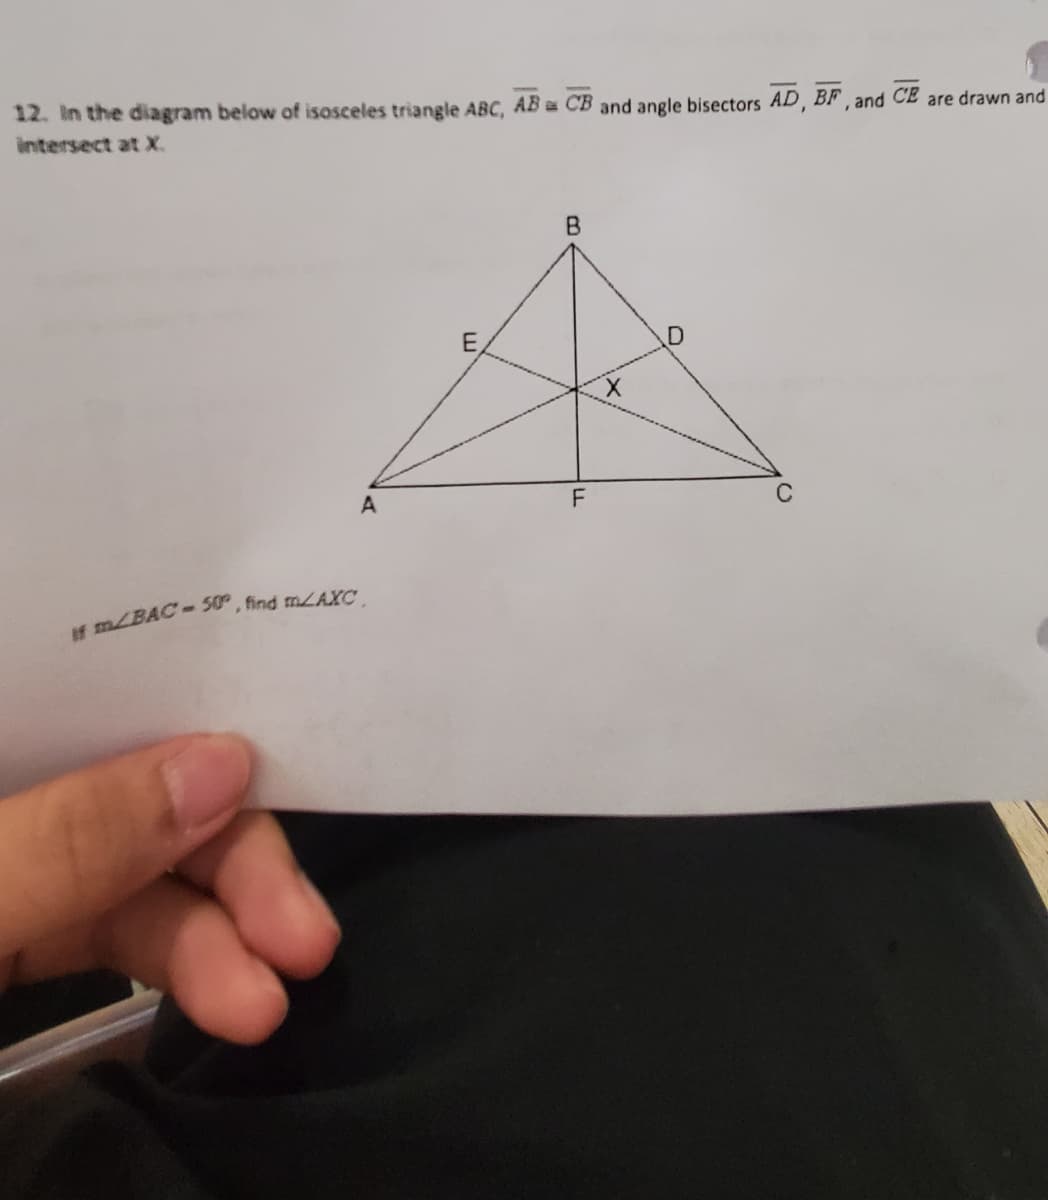 12. in the diagram below of isosceles triangle ABC, AB CB and angle bisectors AD, BF , and CE are drawn and
intersect at X.
B.
E
X.
A
f m/BAC-30", find mLAXC
